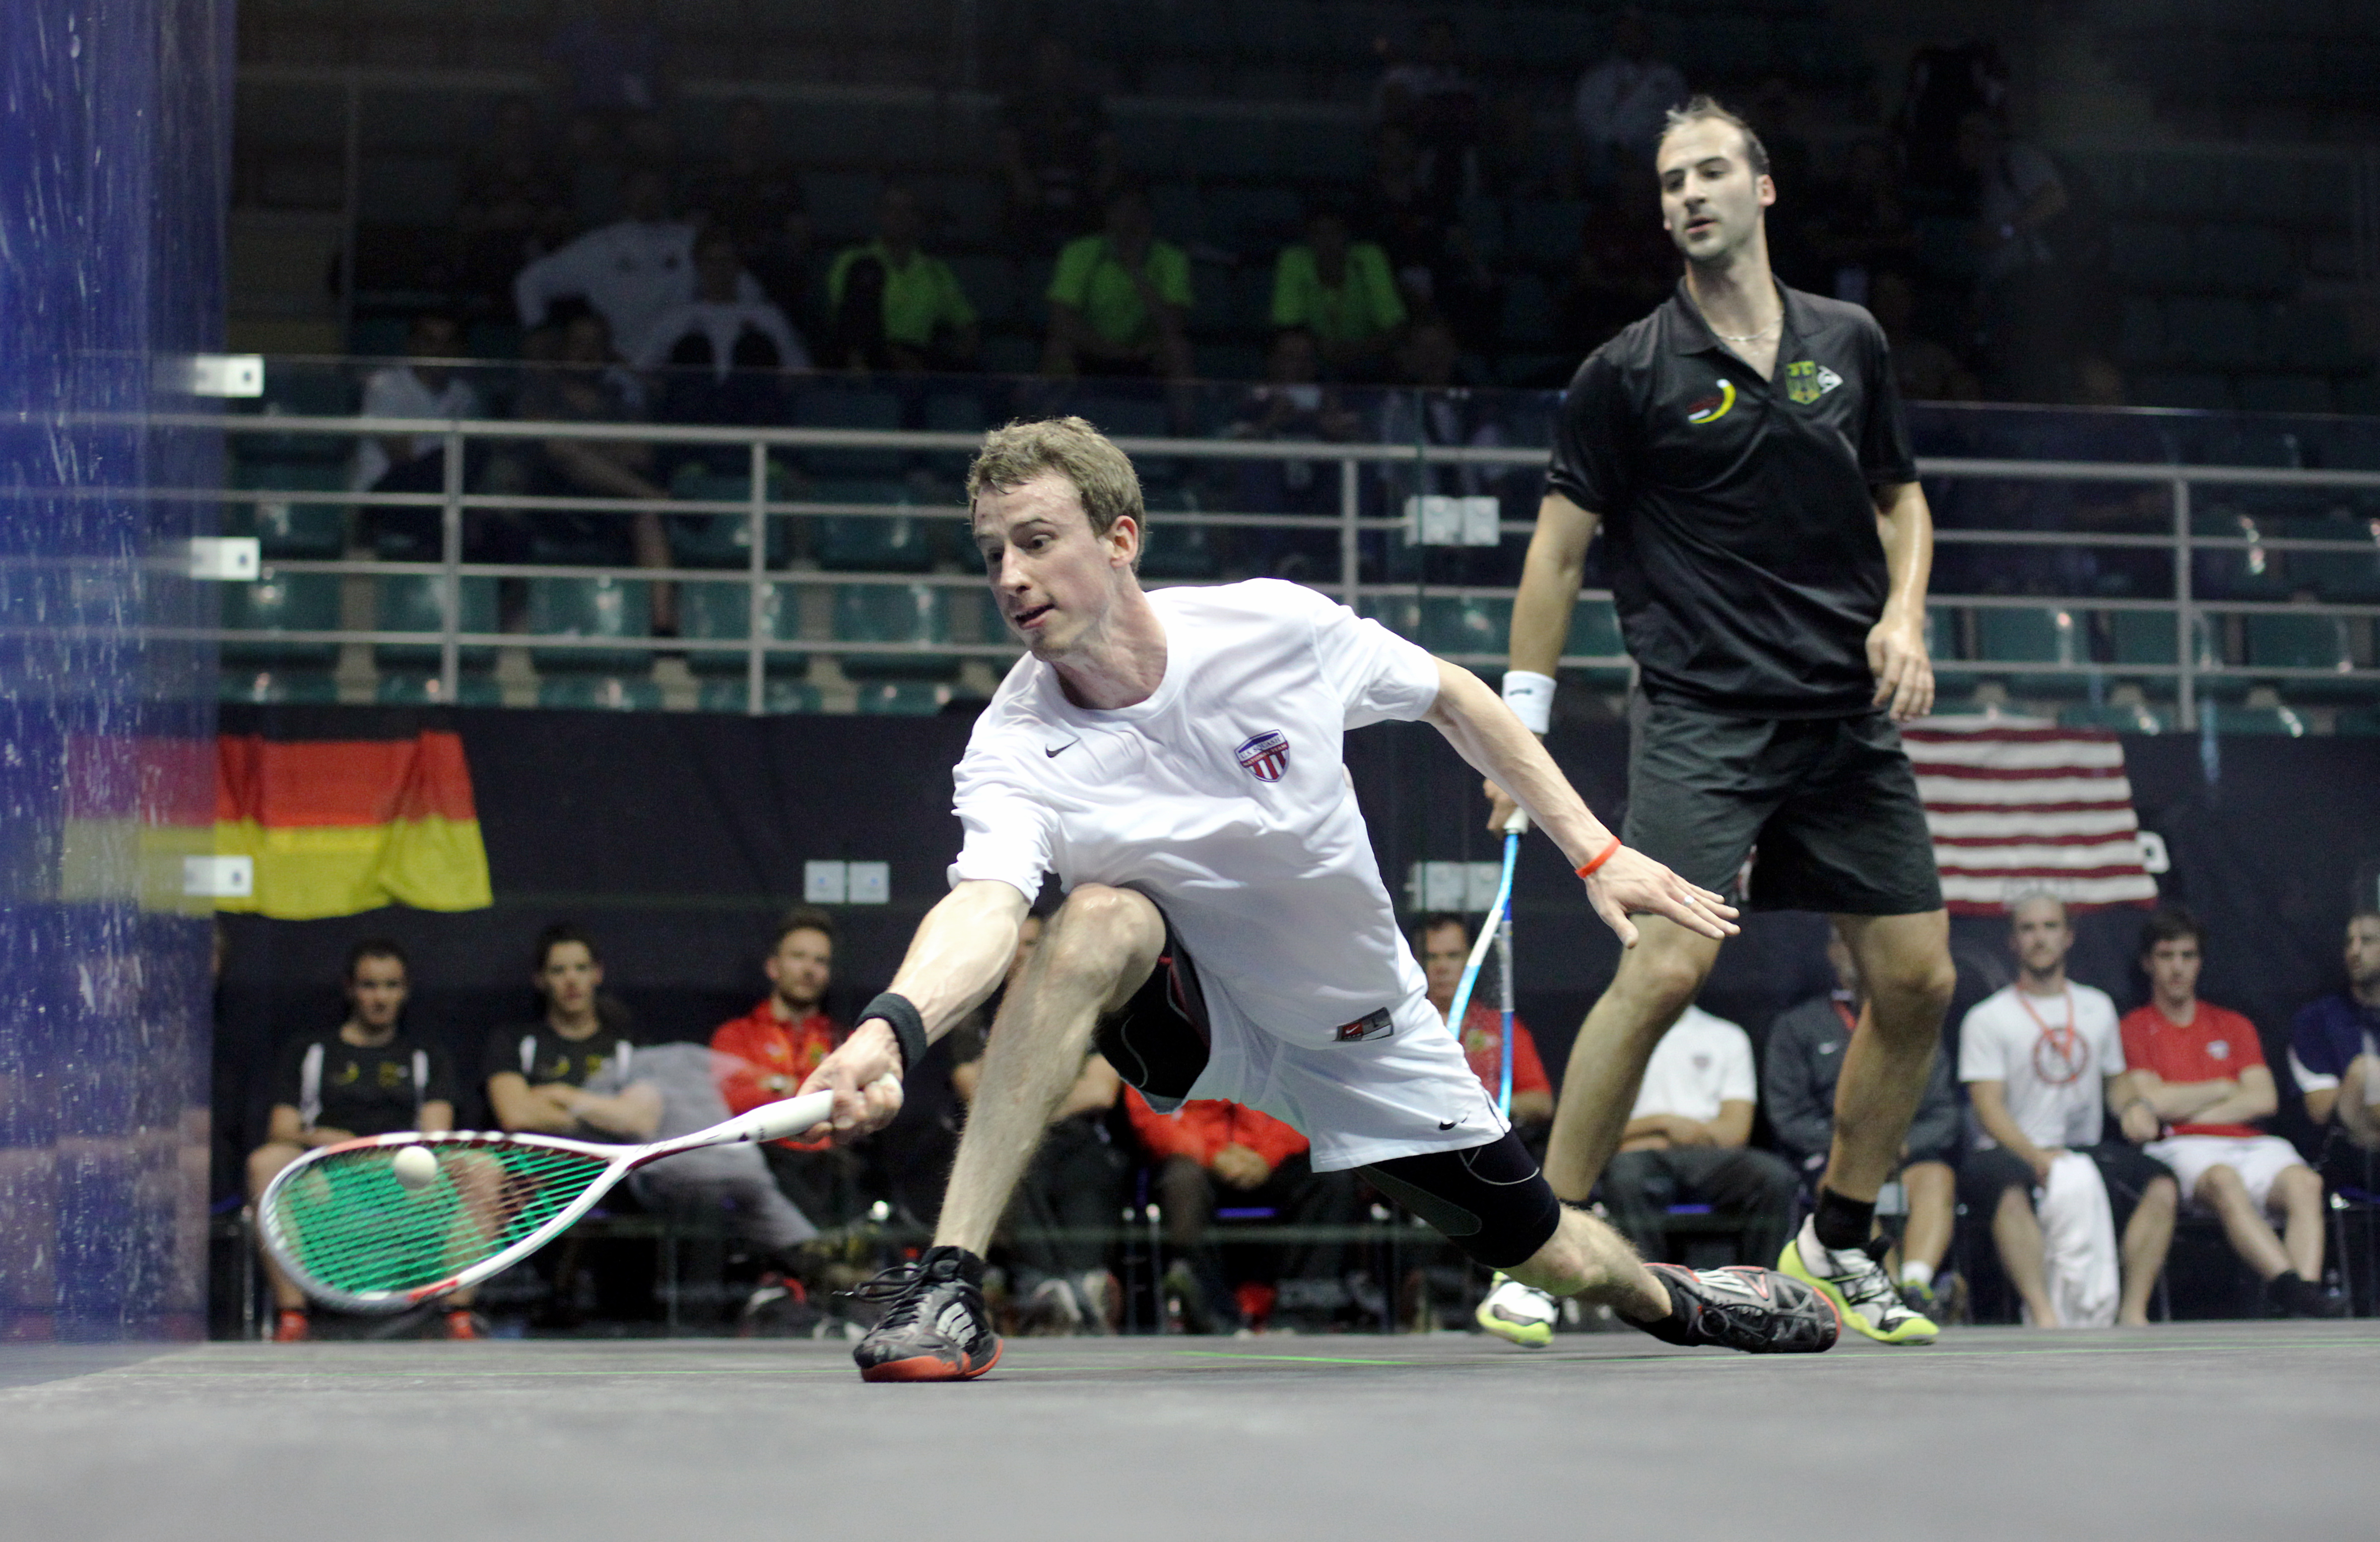 Gordon nearly pulled off a major upset against Germany when he took Simon Rosner to four extremely tight games.